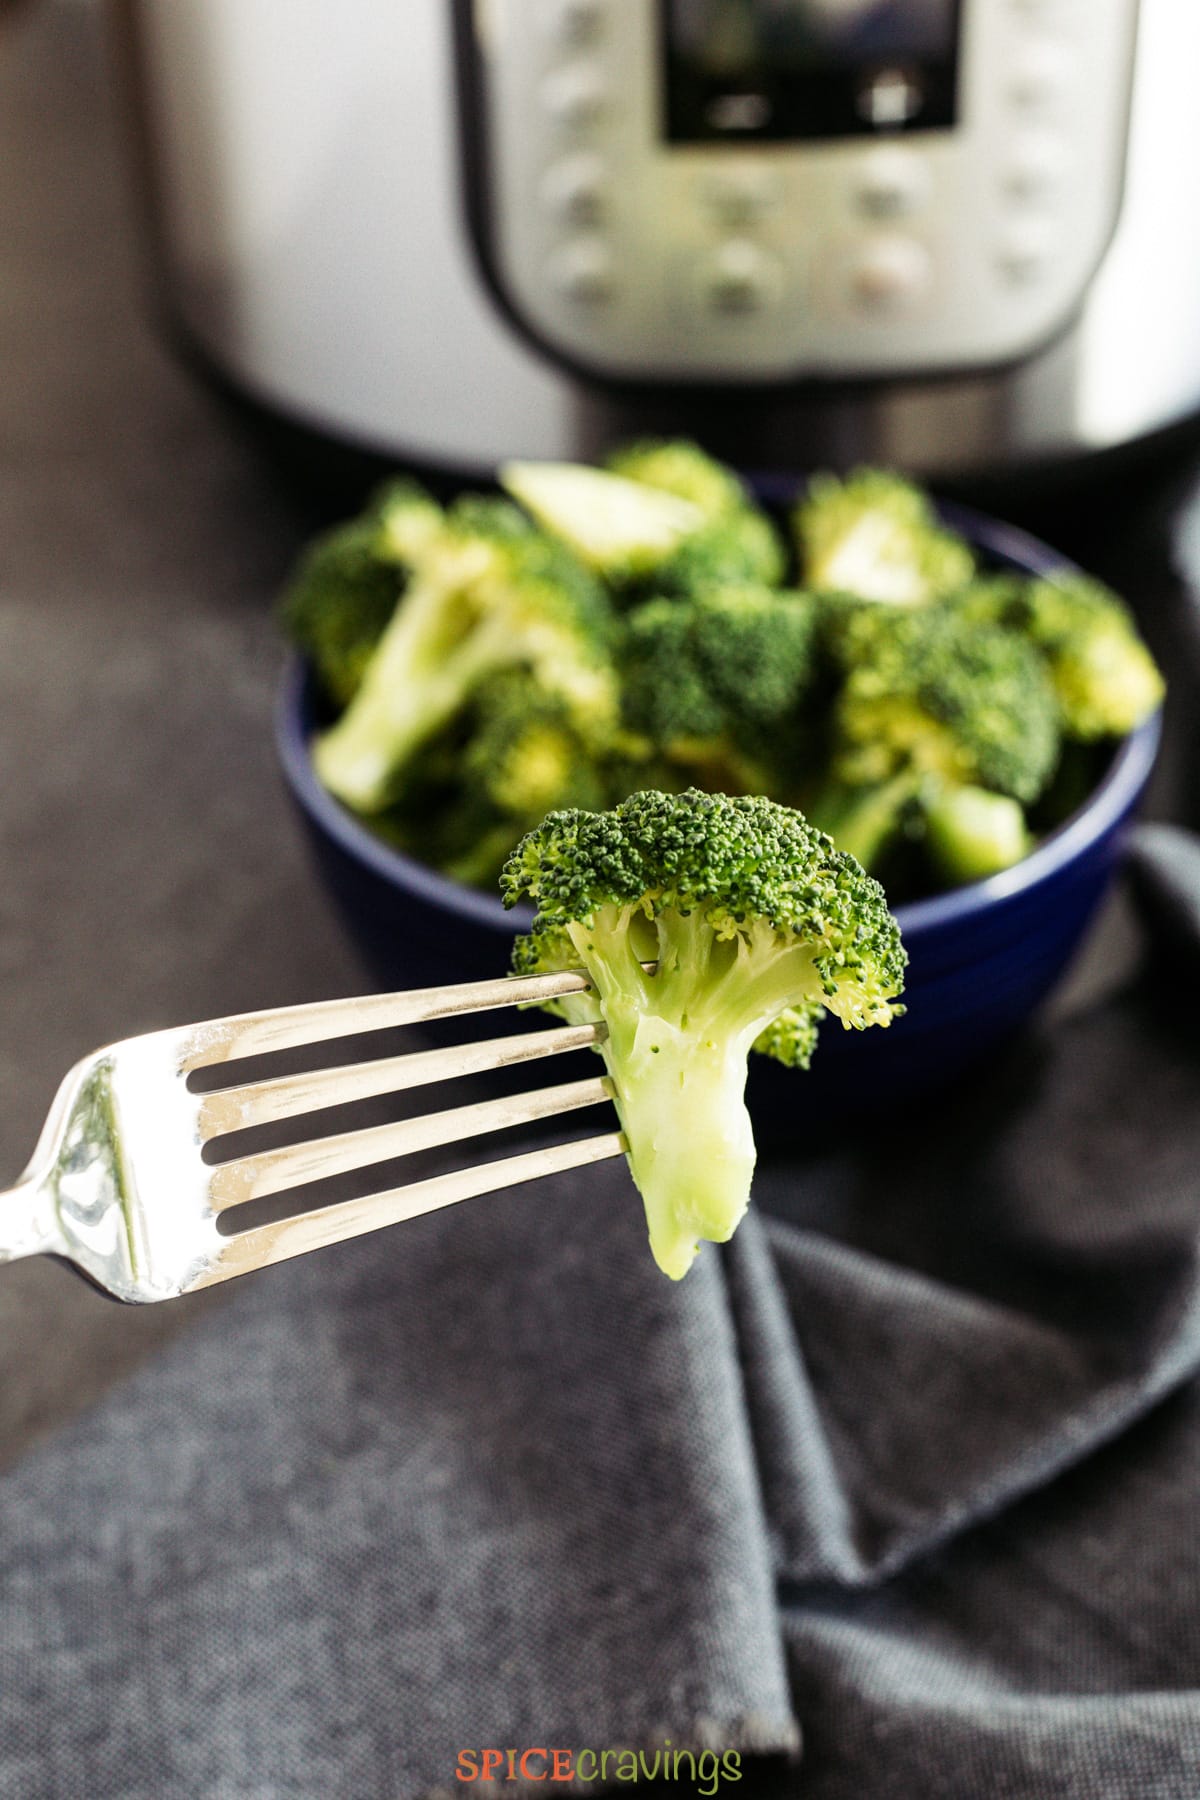 A fork with a piece of pressure cooker steamed broccoli